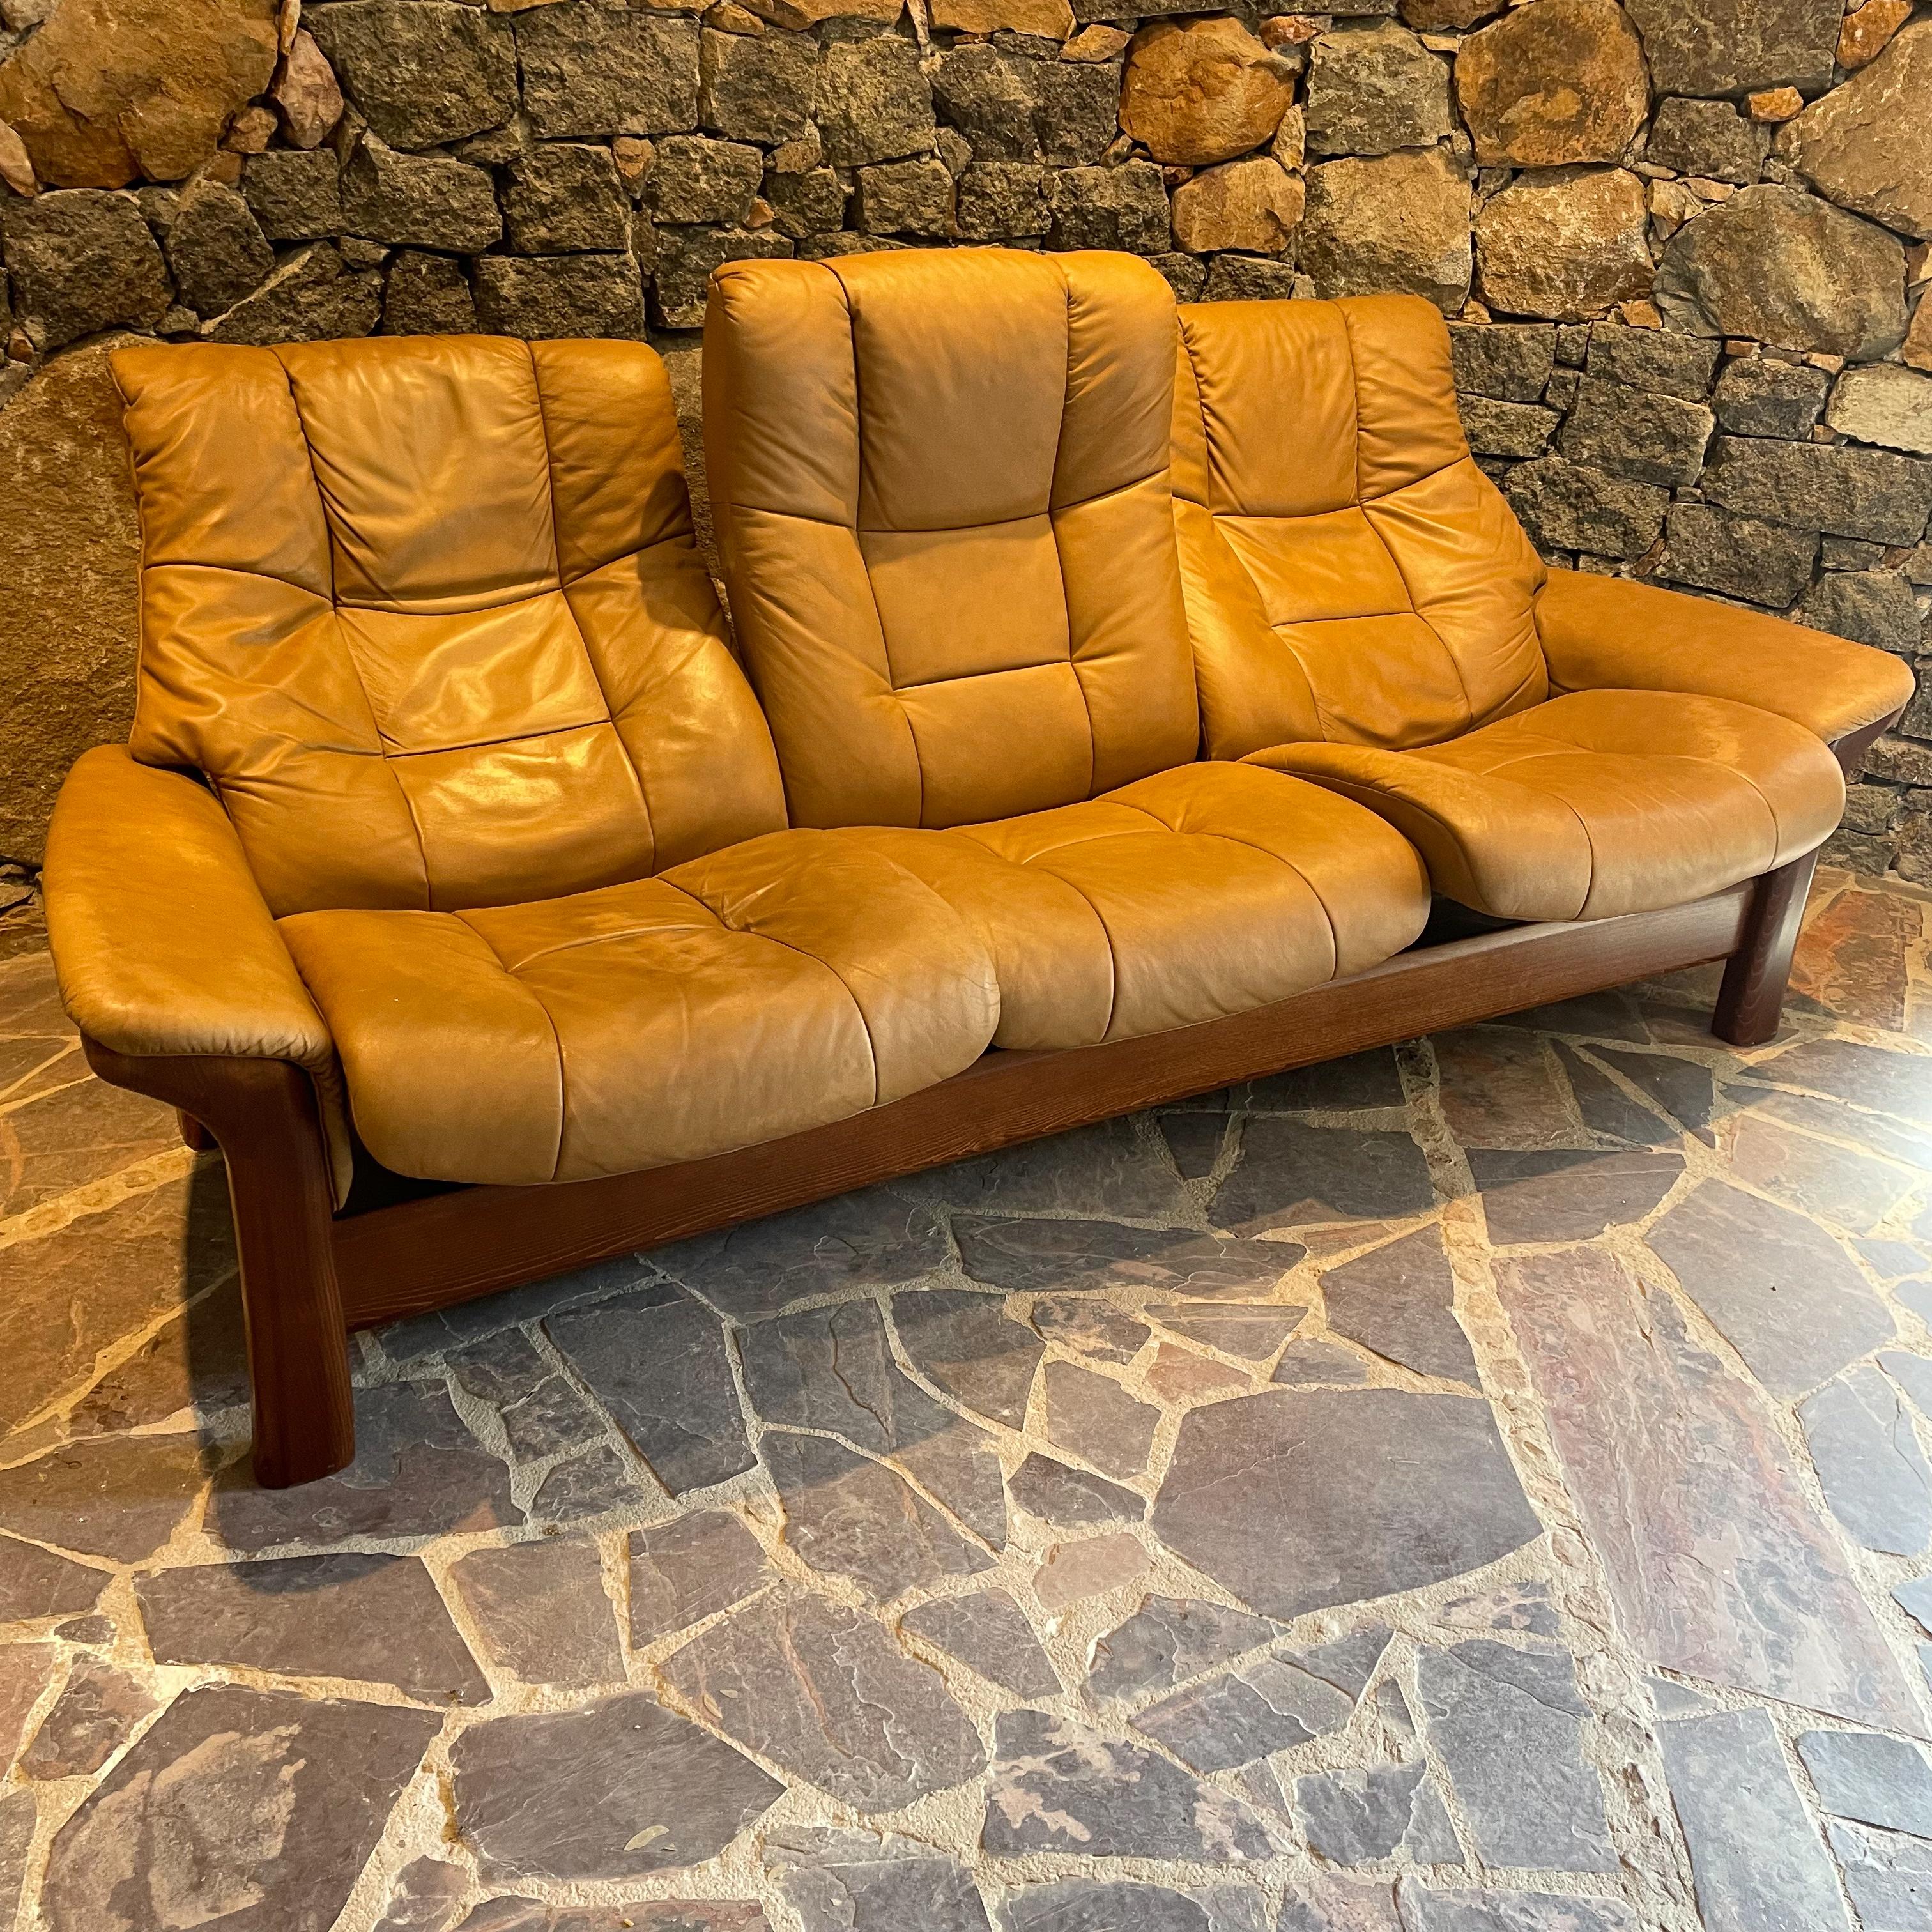 AMBIANIC presents
Norwegian Tan Leather Stressless Reclining Sofa
Superior comfort
Teak Colored Wood Frame not teak wood
Model Windsor High Back-Seater.
Label present.
All seats recline and feature a stressless glide system for maximum support.
40